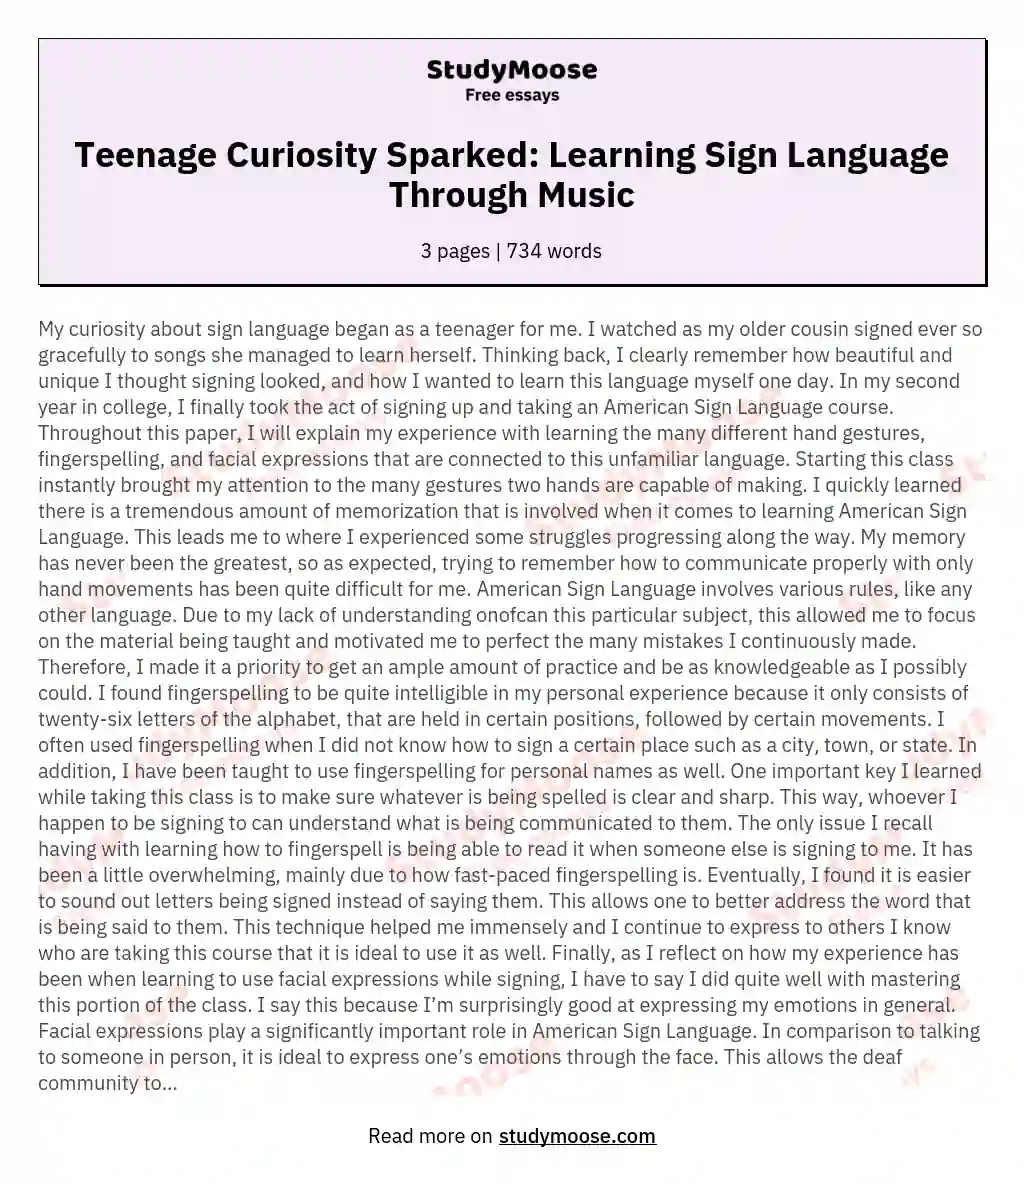 Teenage Curiosity Sparked: Learning Sign Language Through Music essay